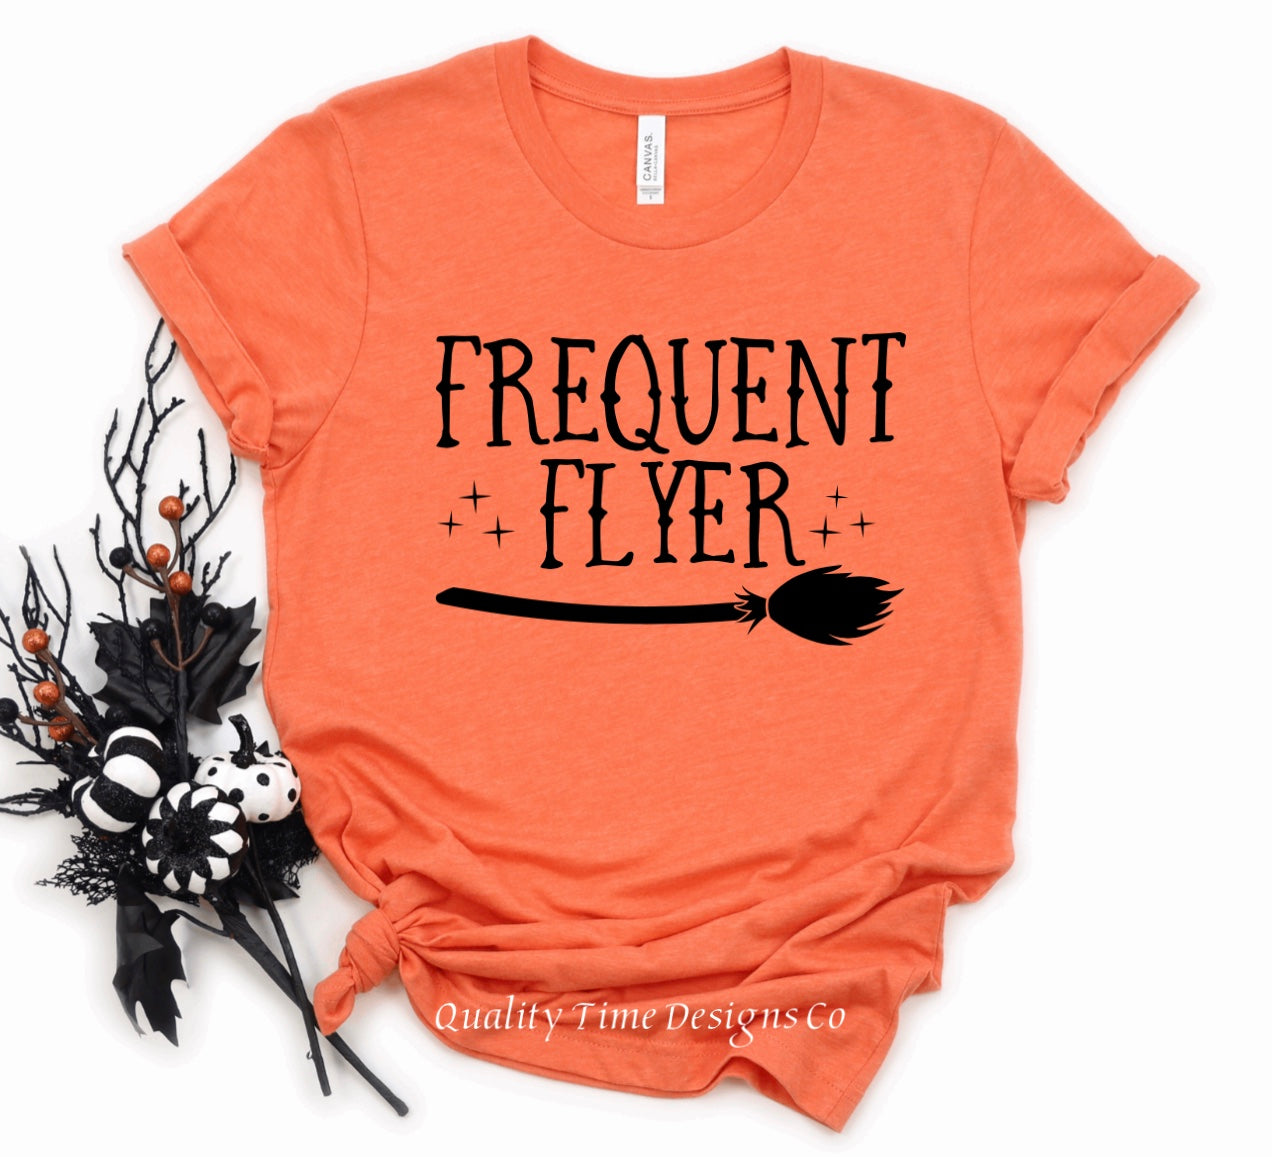 Frequent flyer t-shirt 